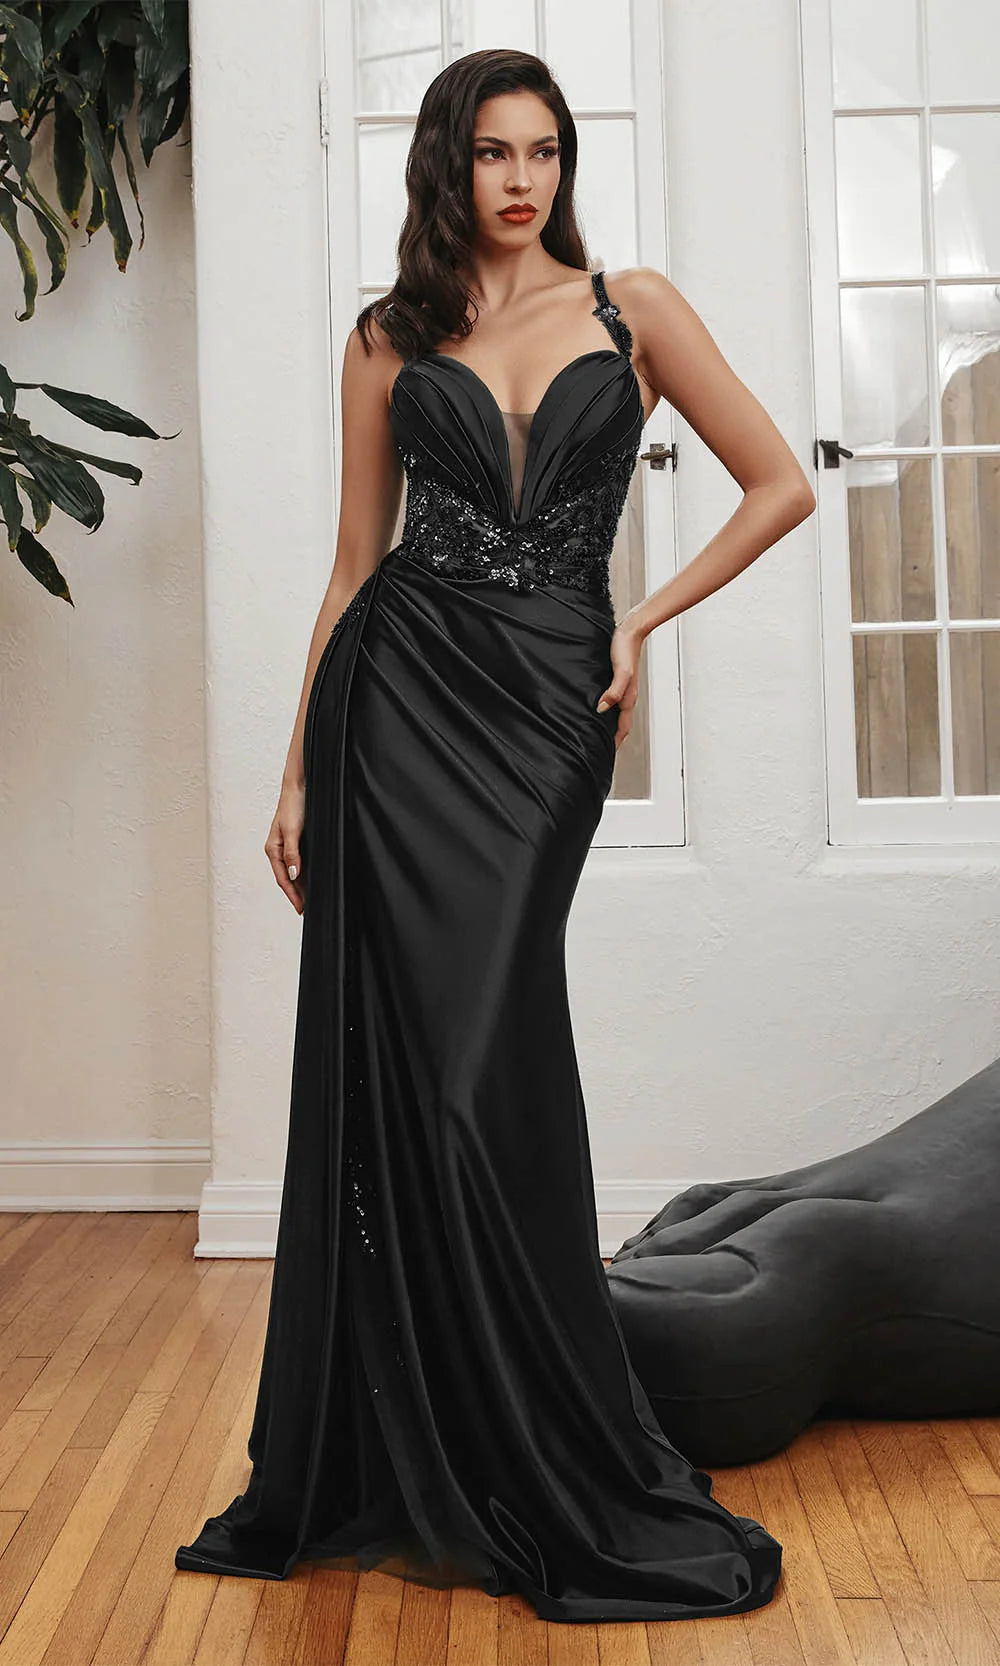 Ladivine CDS417 Embellished Fitted Evening Dress - Fitted silhouette with lace-embellished waistline, pleated bust, and beaded sheer leg slit.  Model is wearing the dress in black.